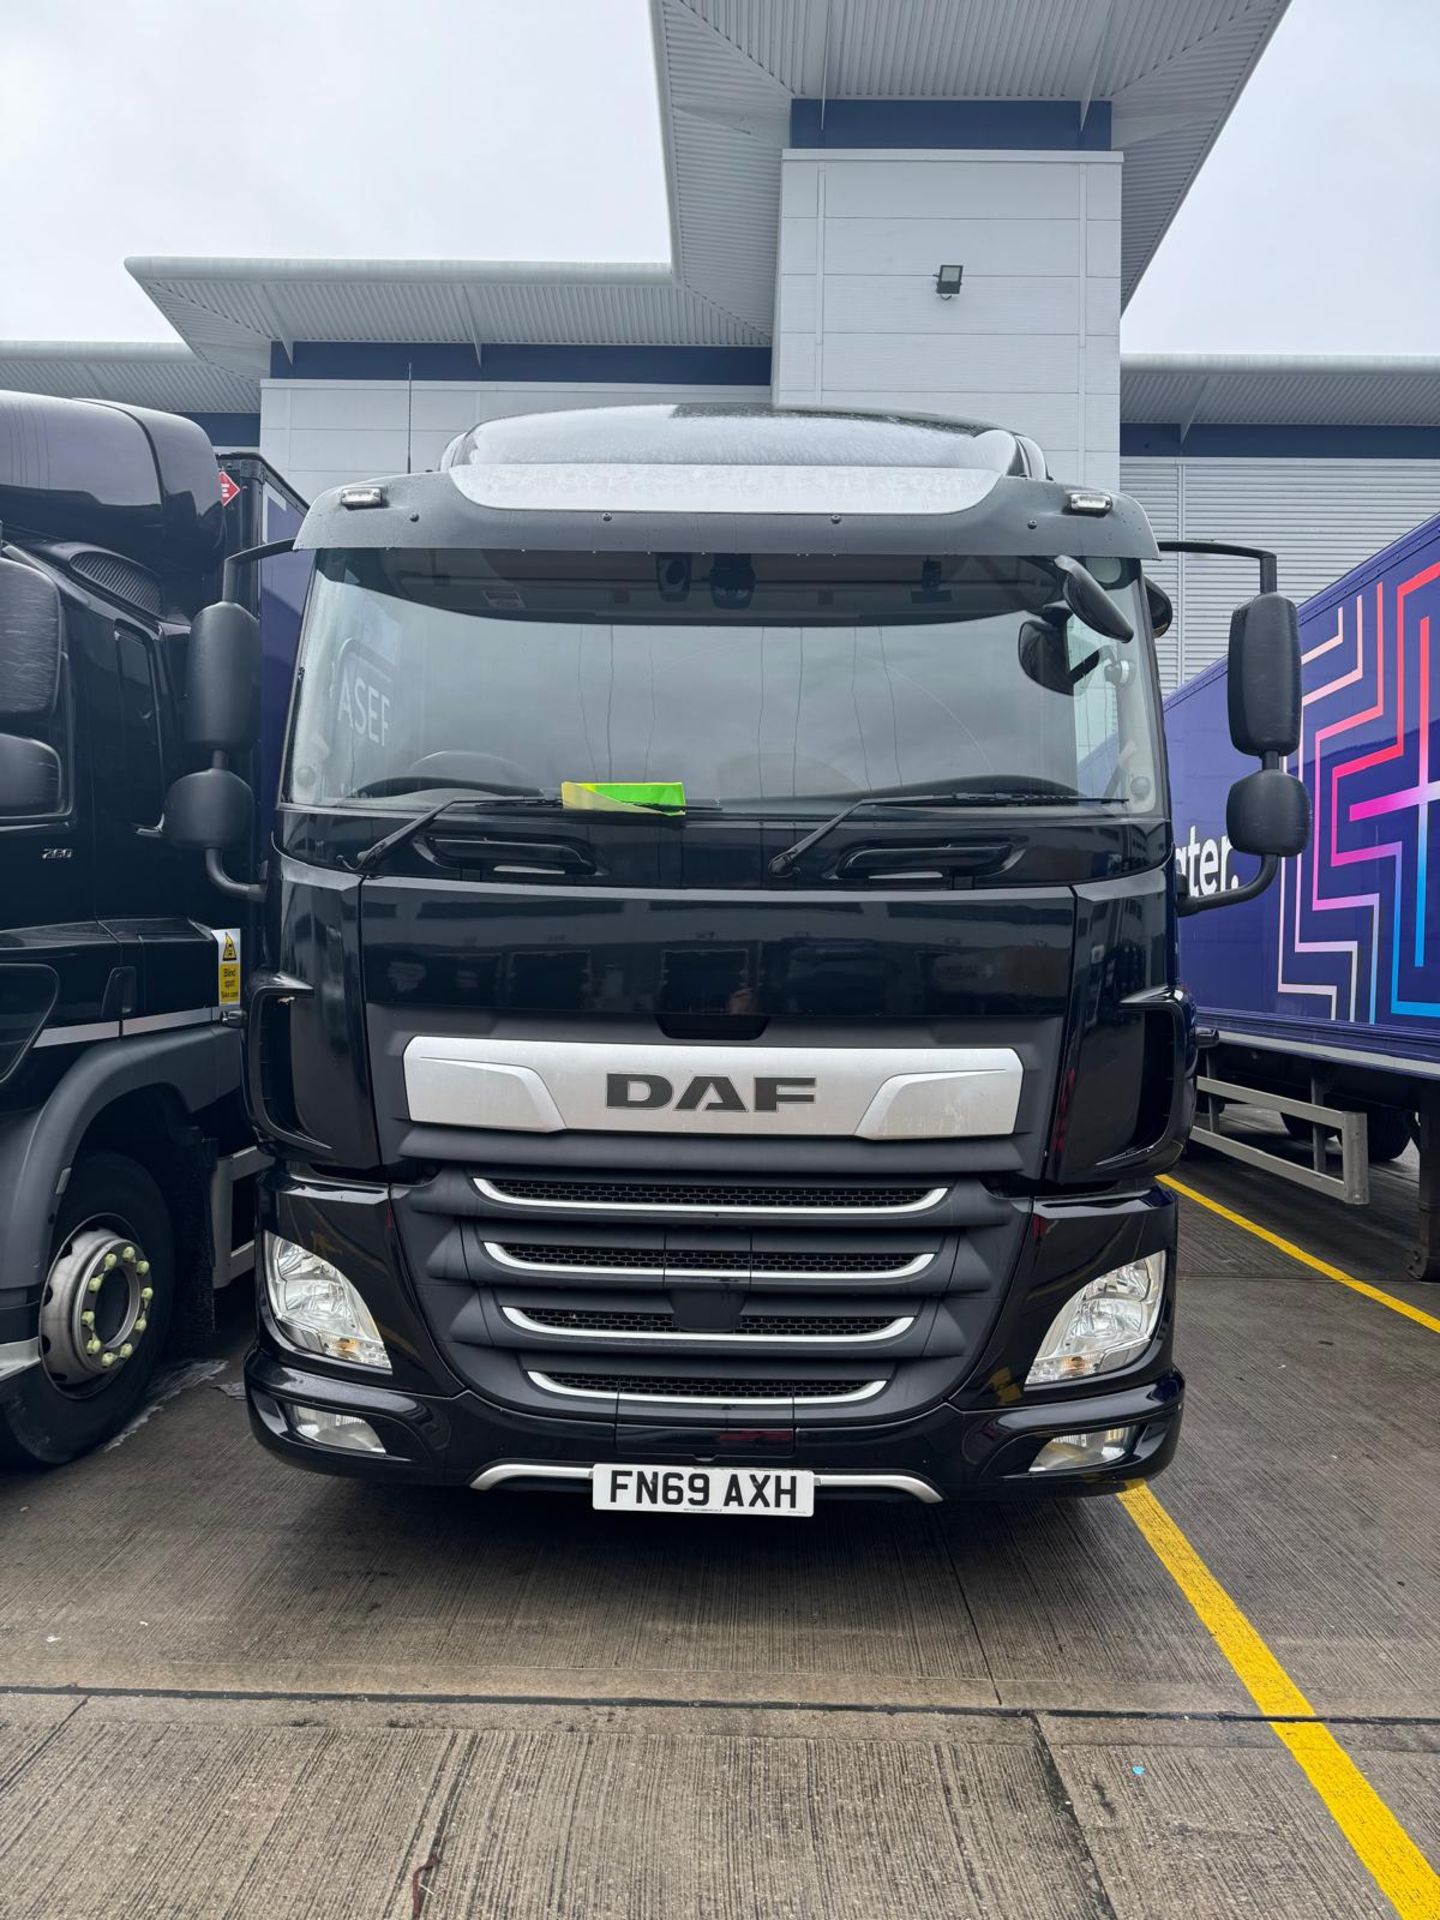 2019, DAF CF 260 FA (Ex-Fleet Owned & Maintained) - FN69 AXH (18 Ton Rigid Truck with Tail Lift) - Bild 5 aus 14